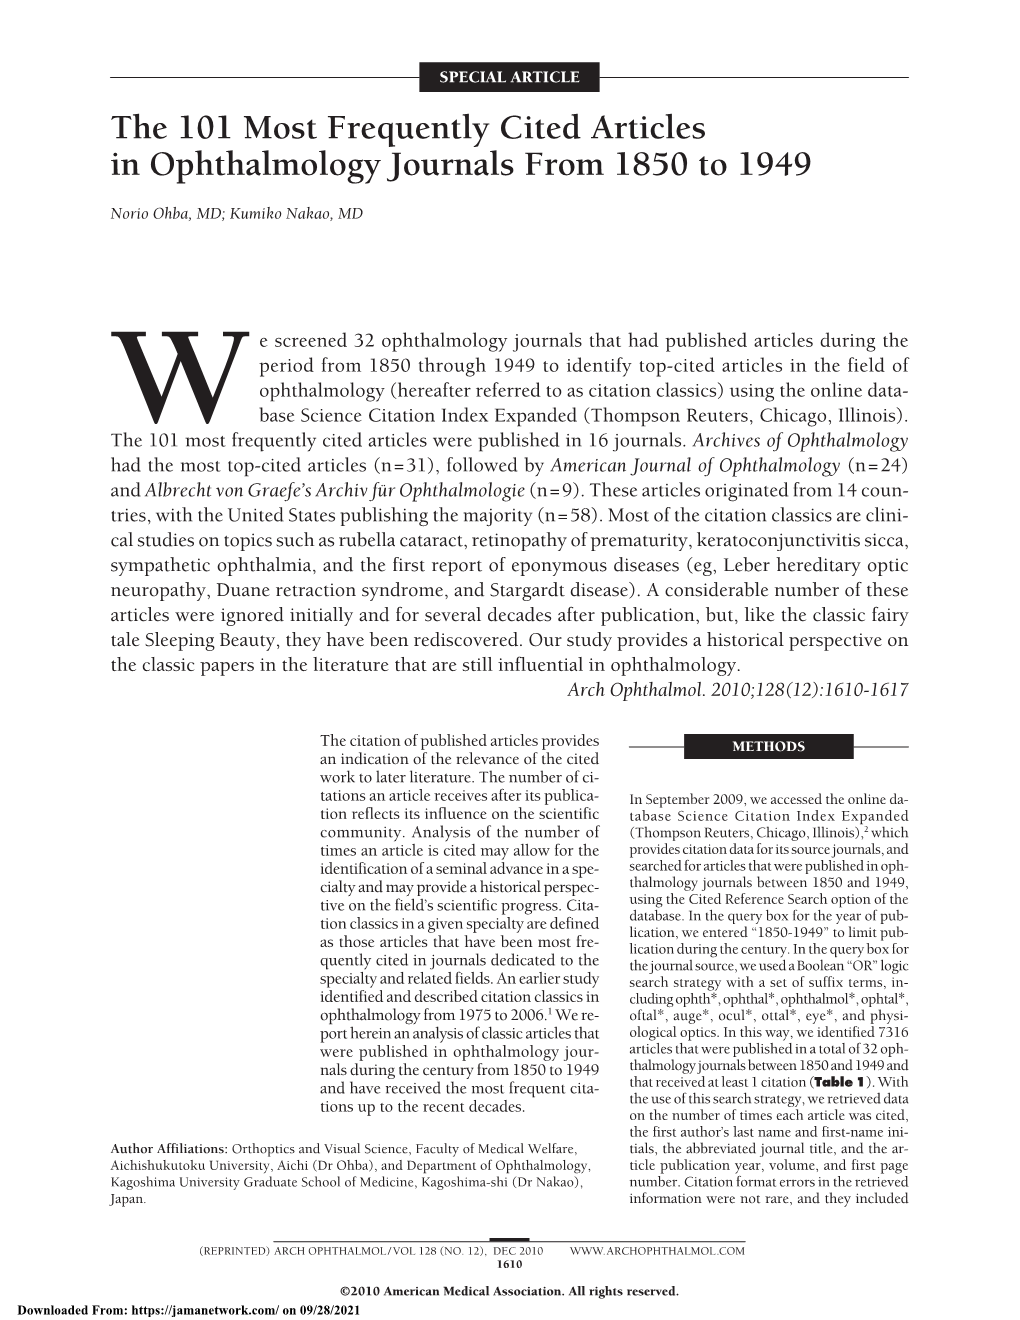 The 101 Most Frequently Cited Articles in Ophthalmology Journals from 1850 to 1949